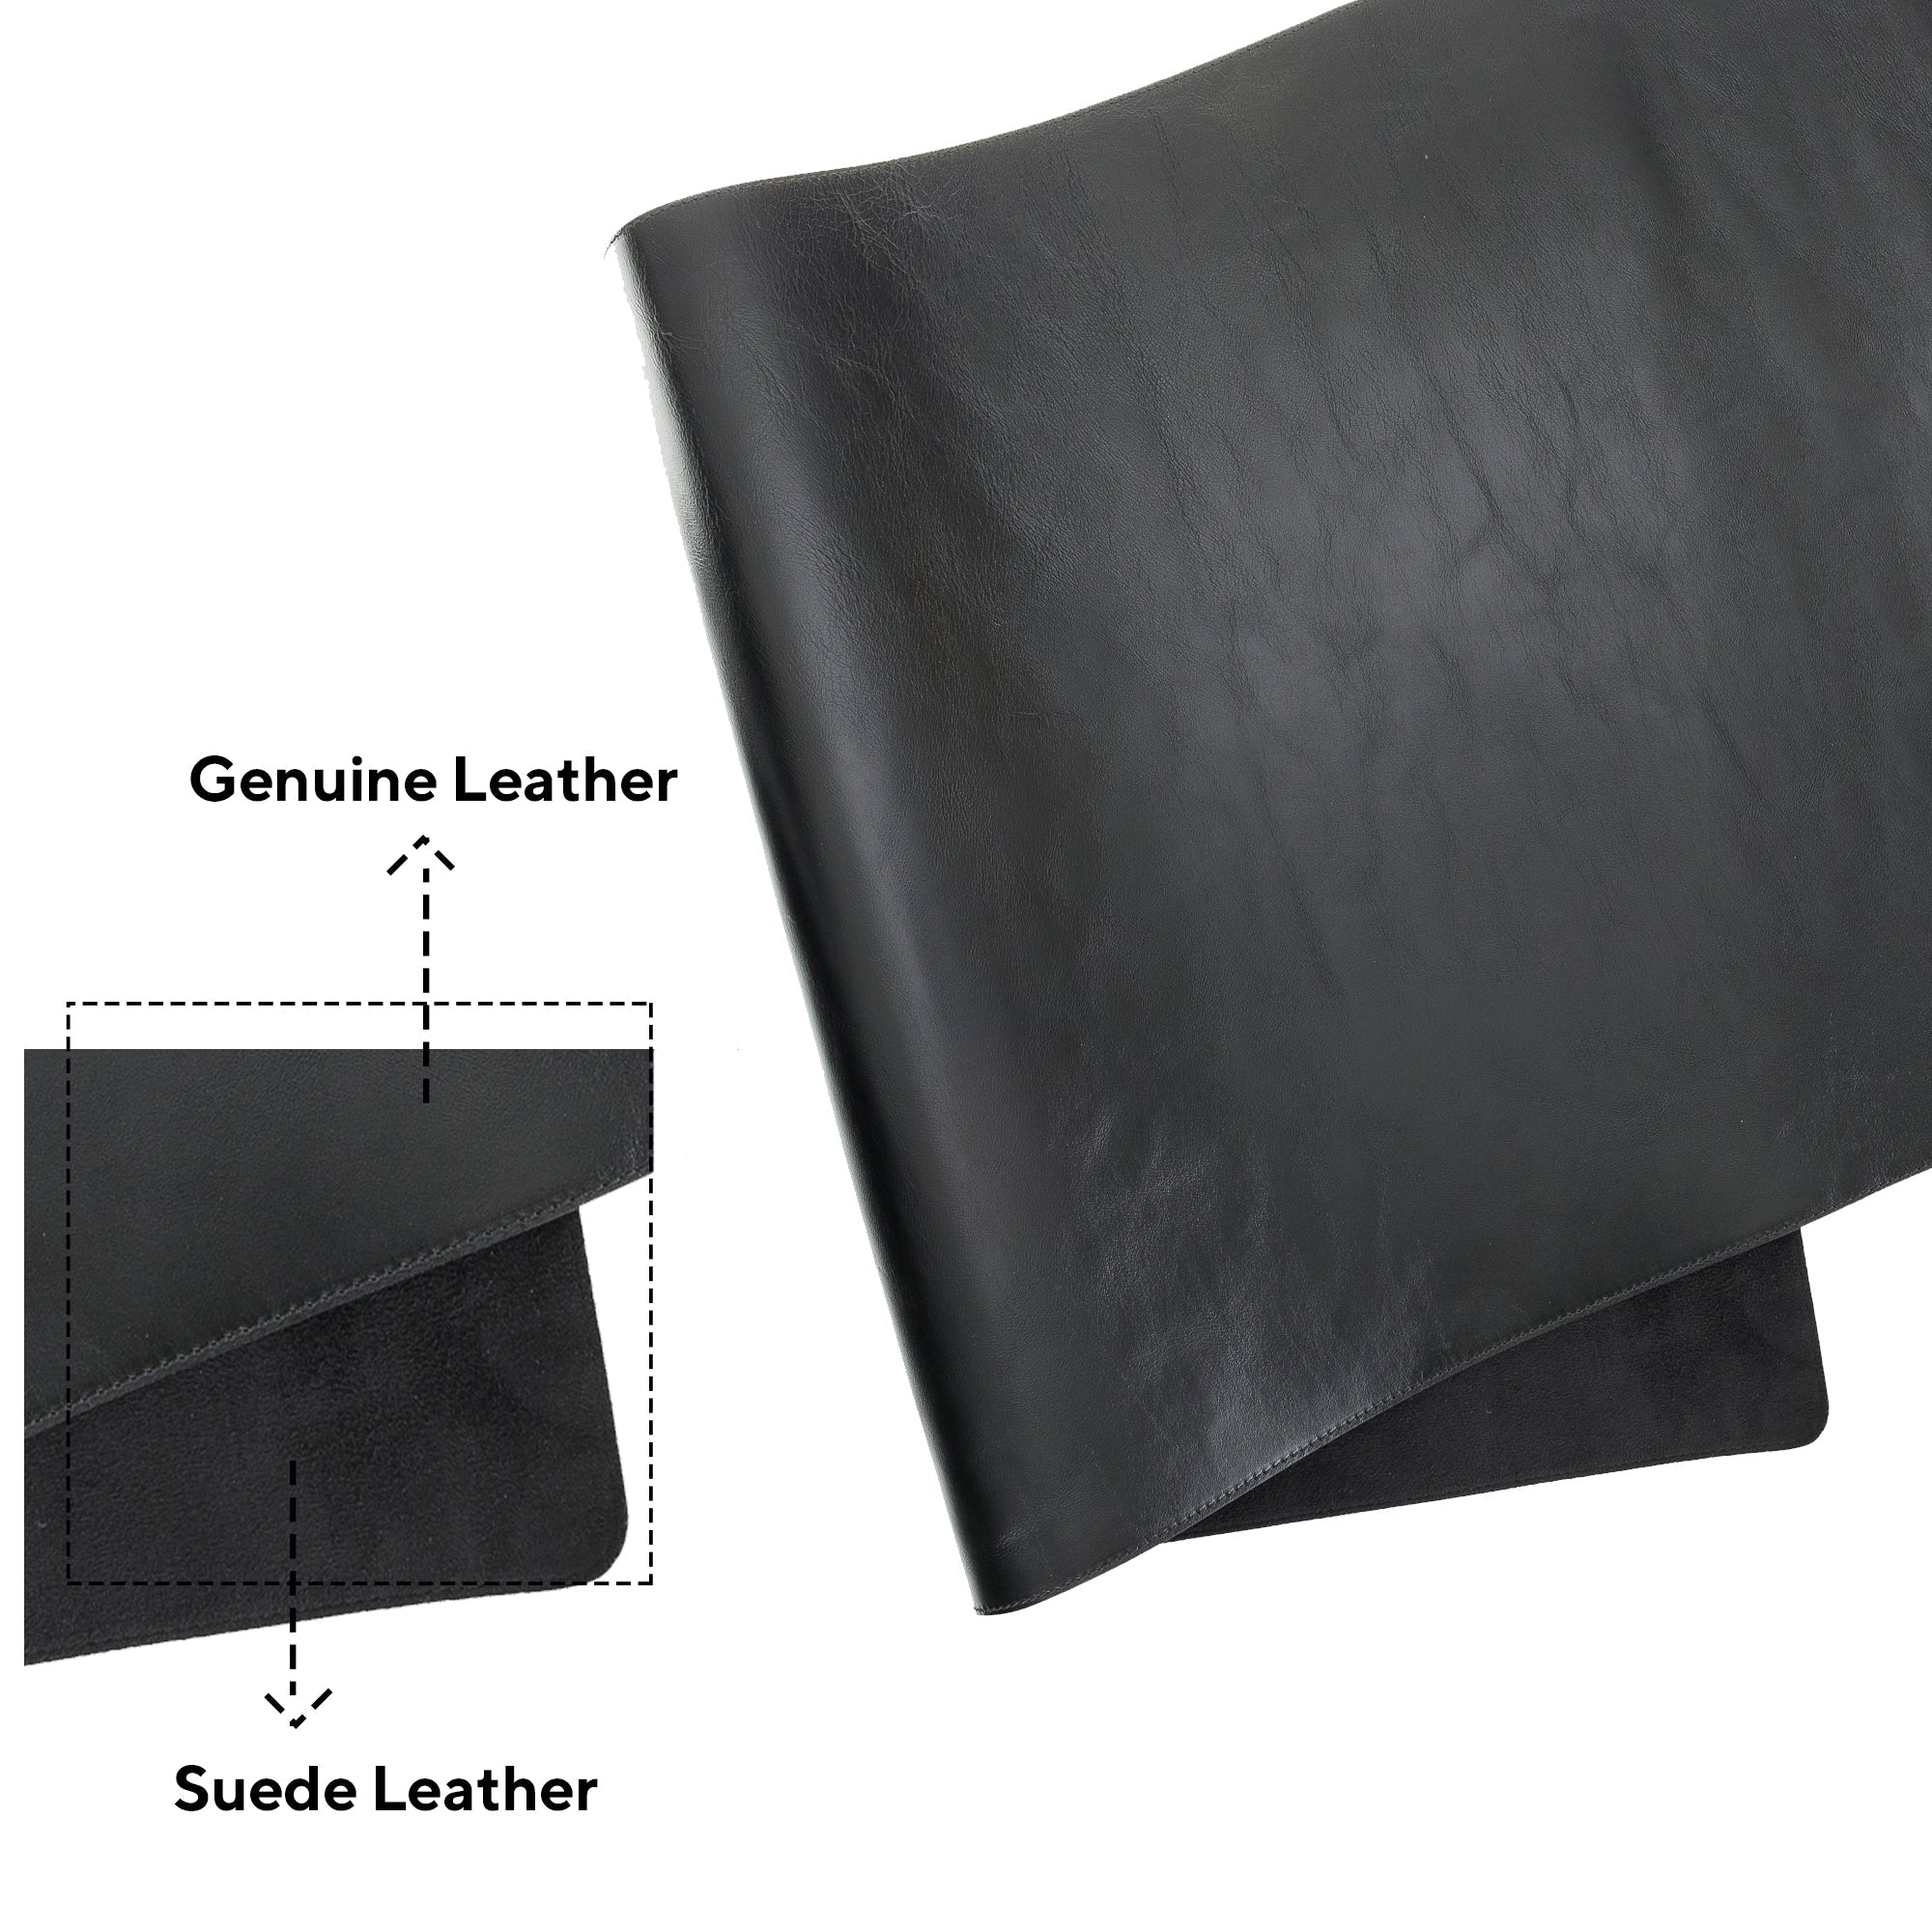 LupinnyLeather Genuine Leather Deskmat, Computer Pad, Office Desk Pad (Black) 3